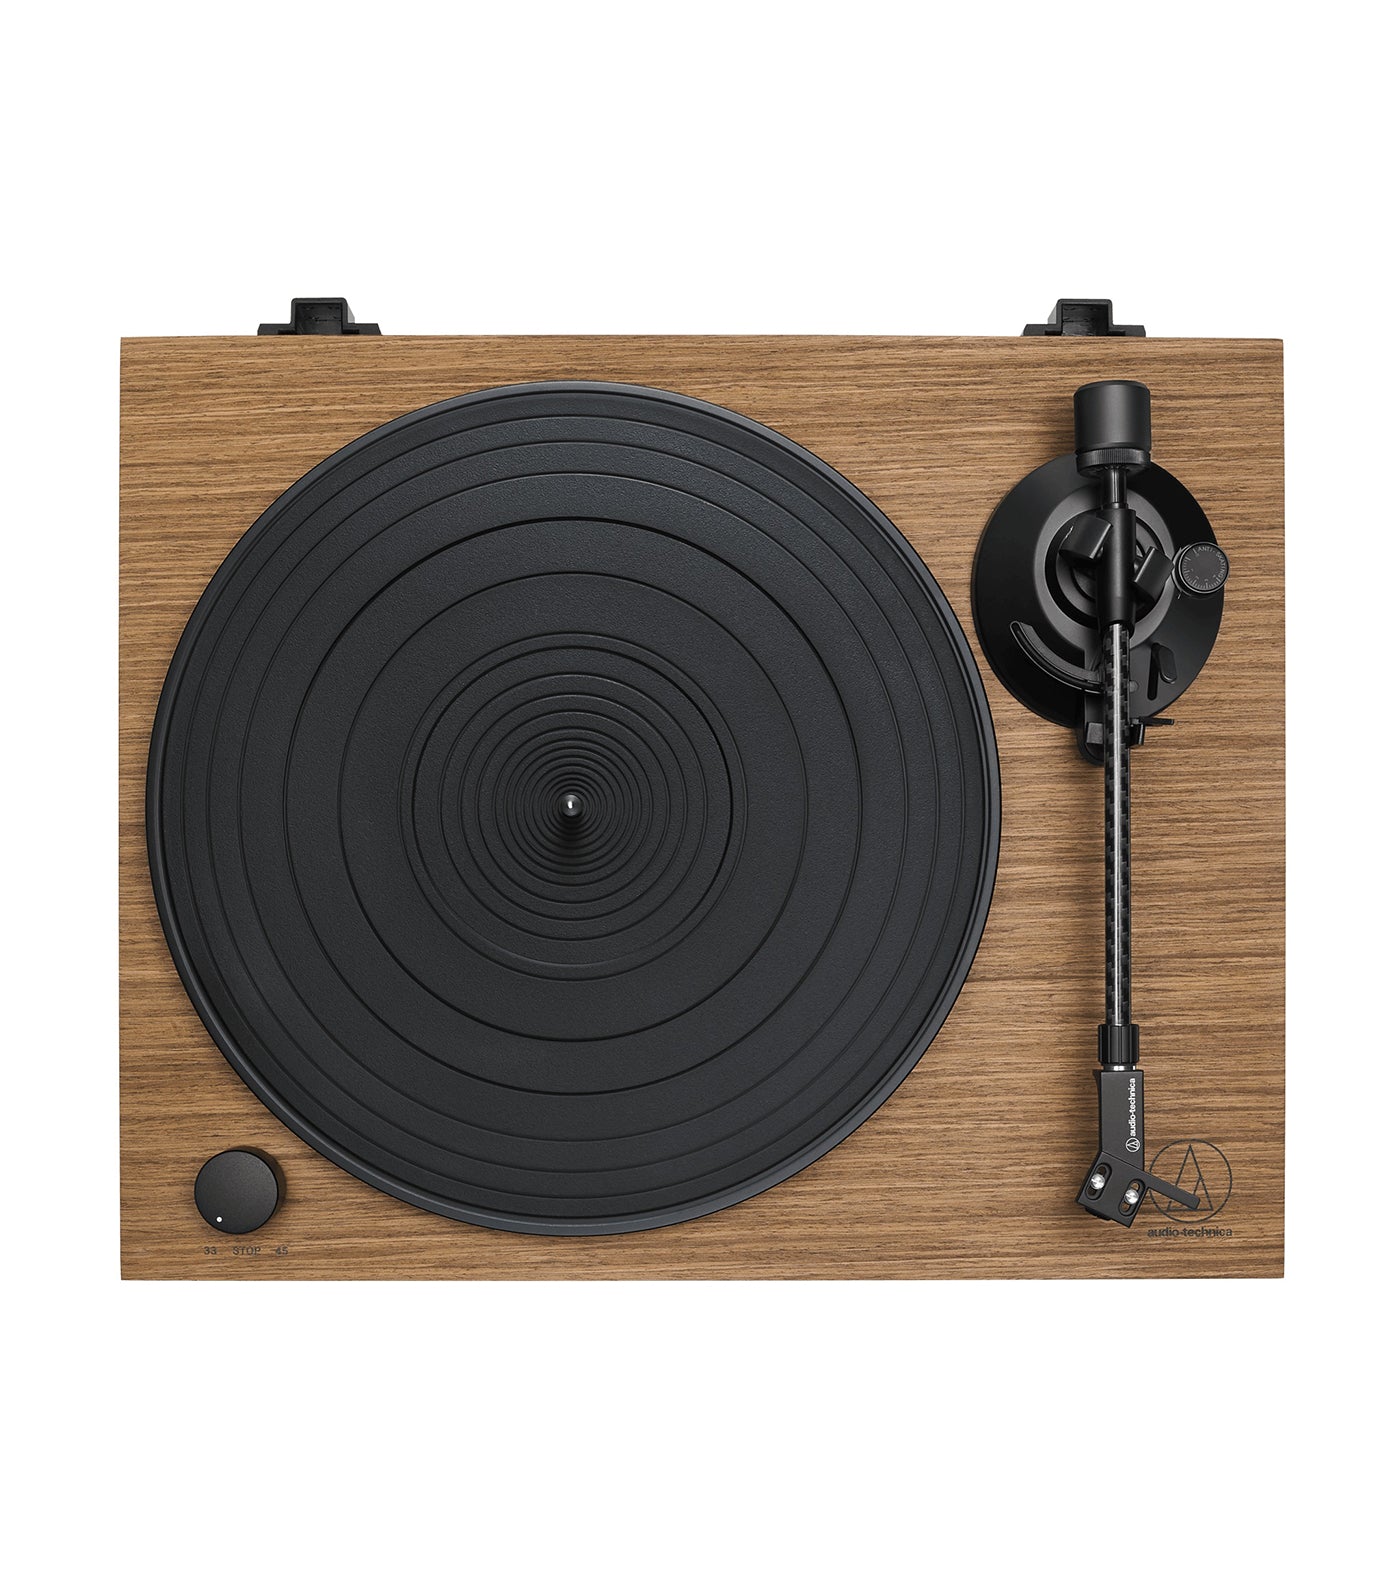 Fully Manual Belt-Drive Turntable